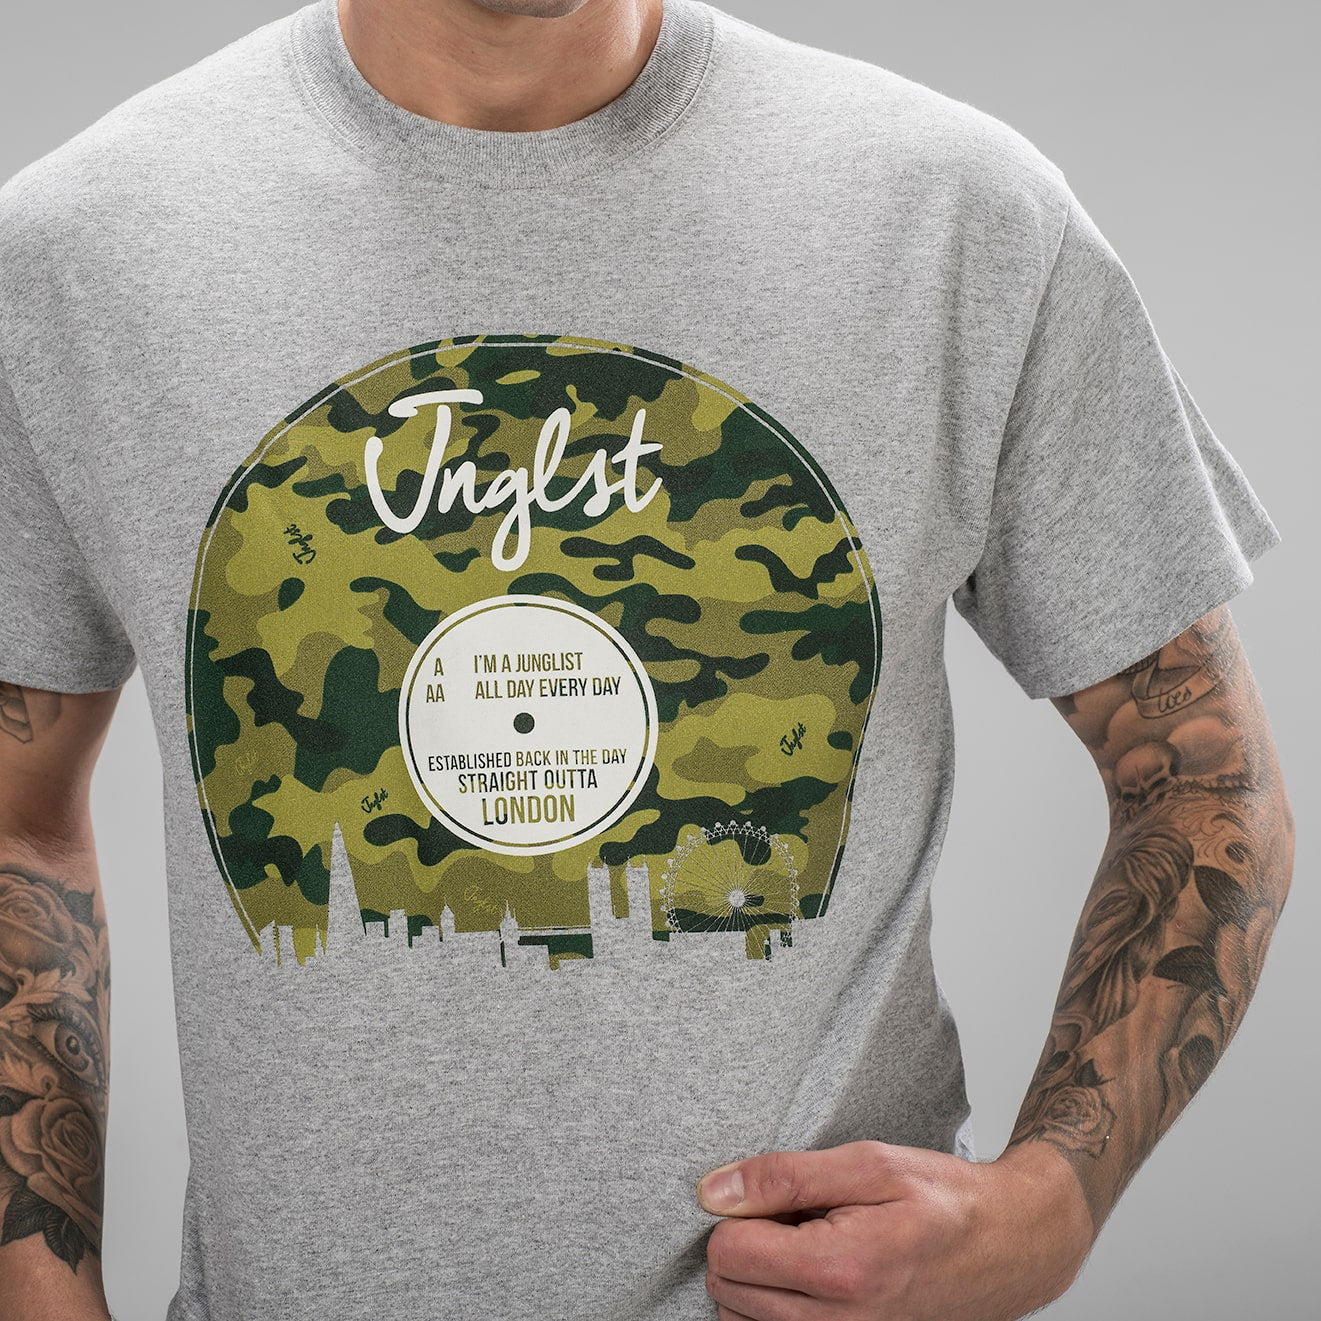 Camo Green design on Grey T-Shirt for Junglists